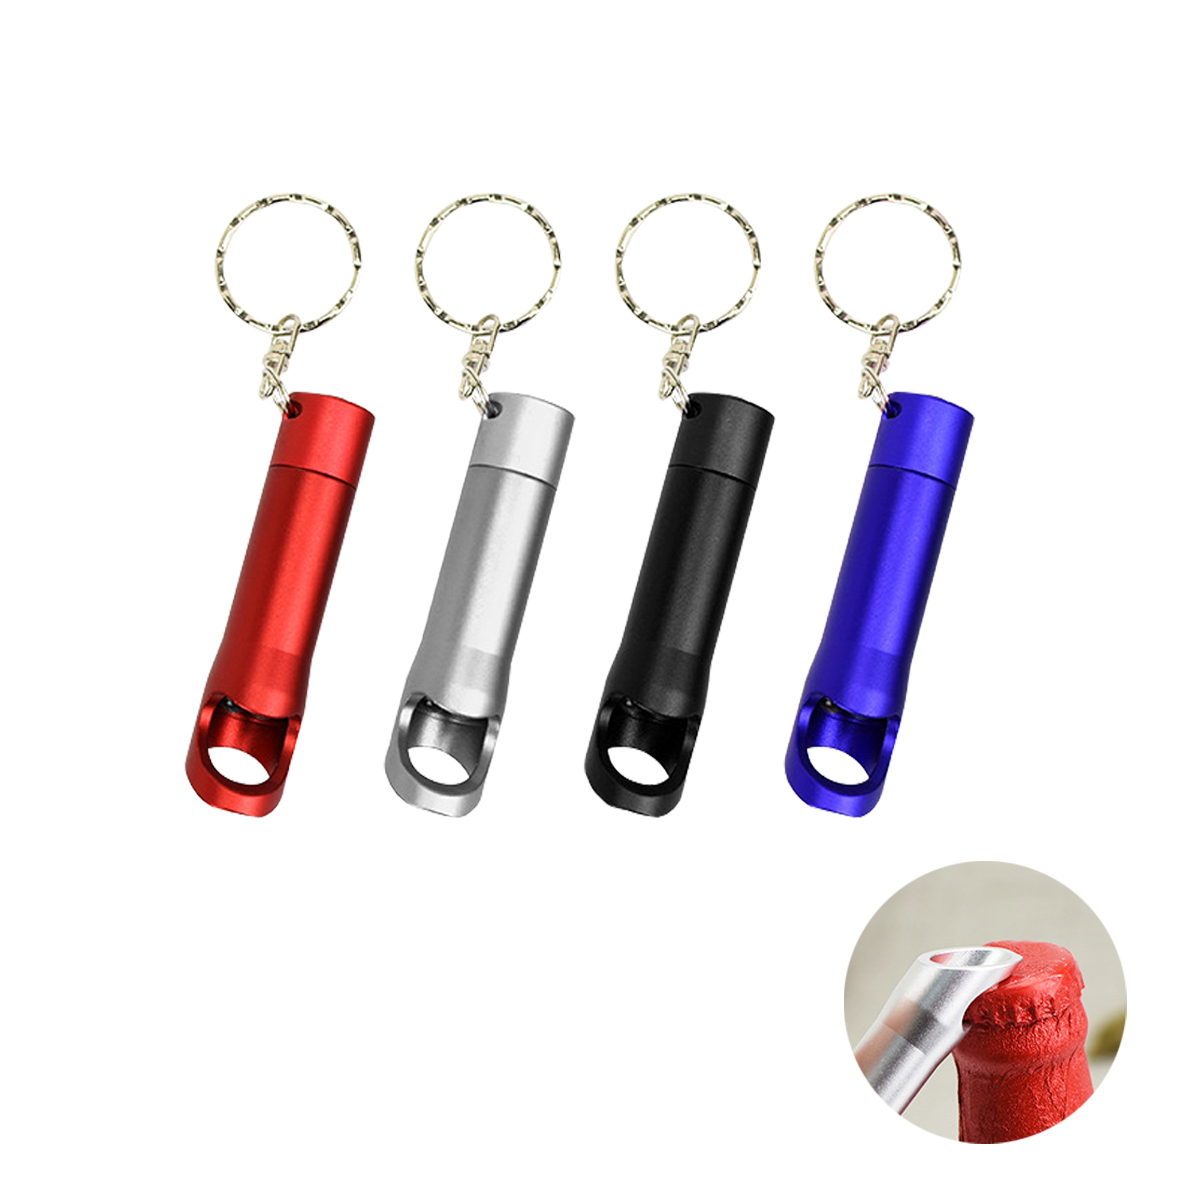 Mini Torchlight with Bottle Opener